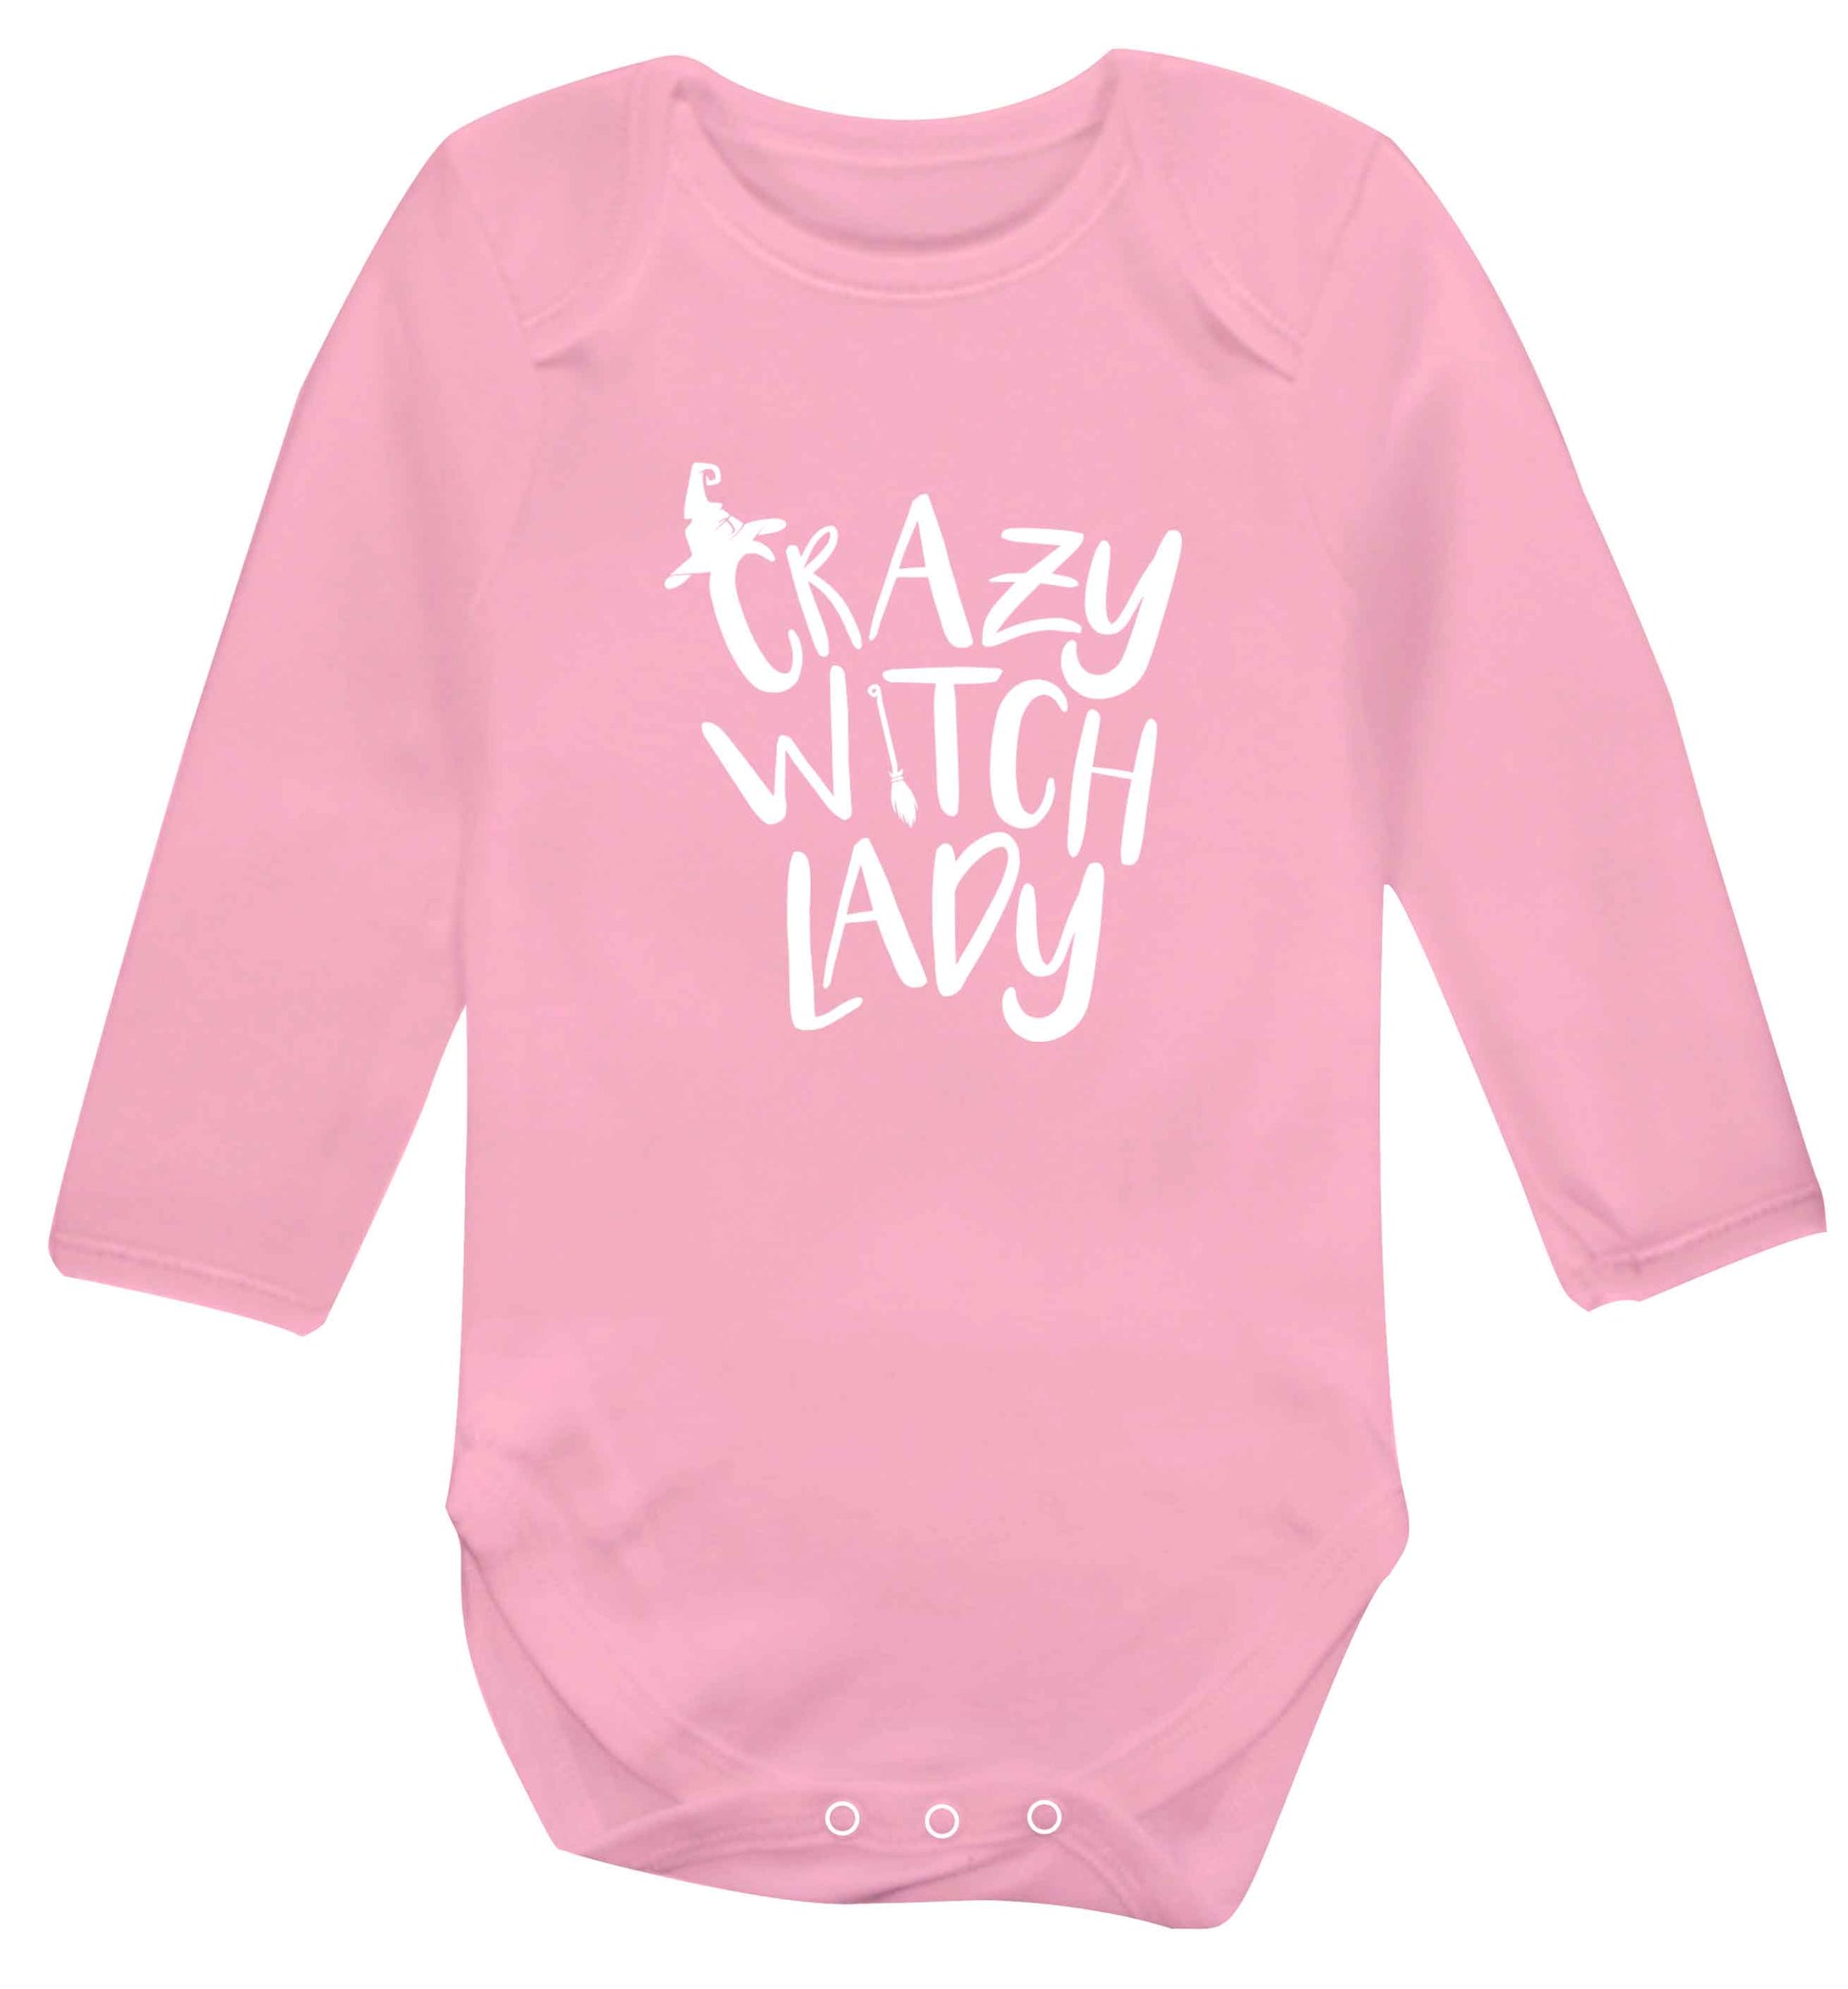 Crazy witch lady baby vest long sleeved pale pink 6-12 months